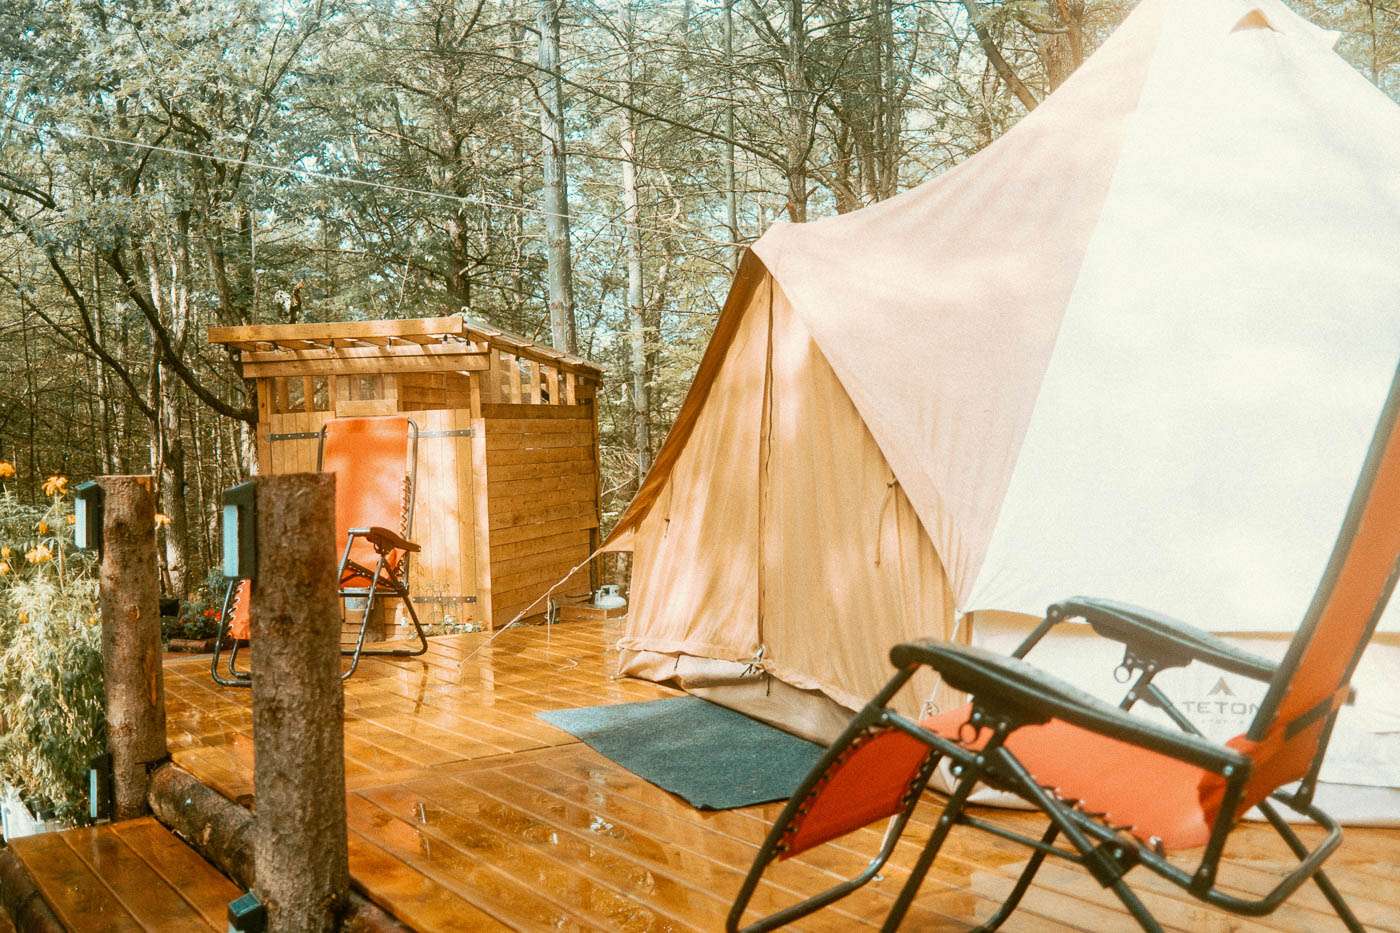 Bell Tent Glamping Experience in Ontario